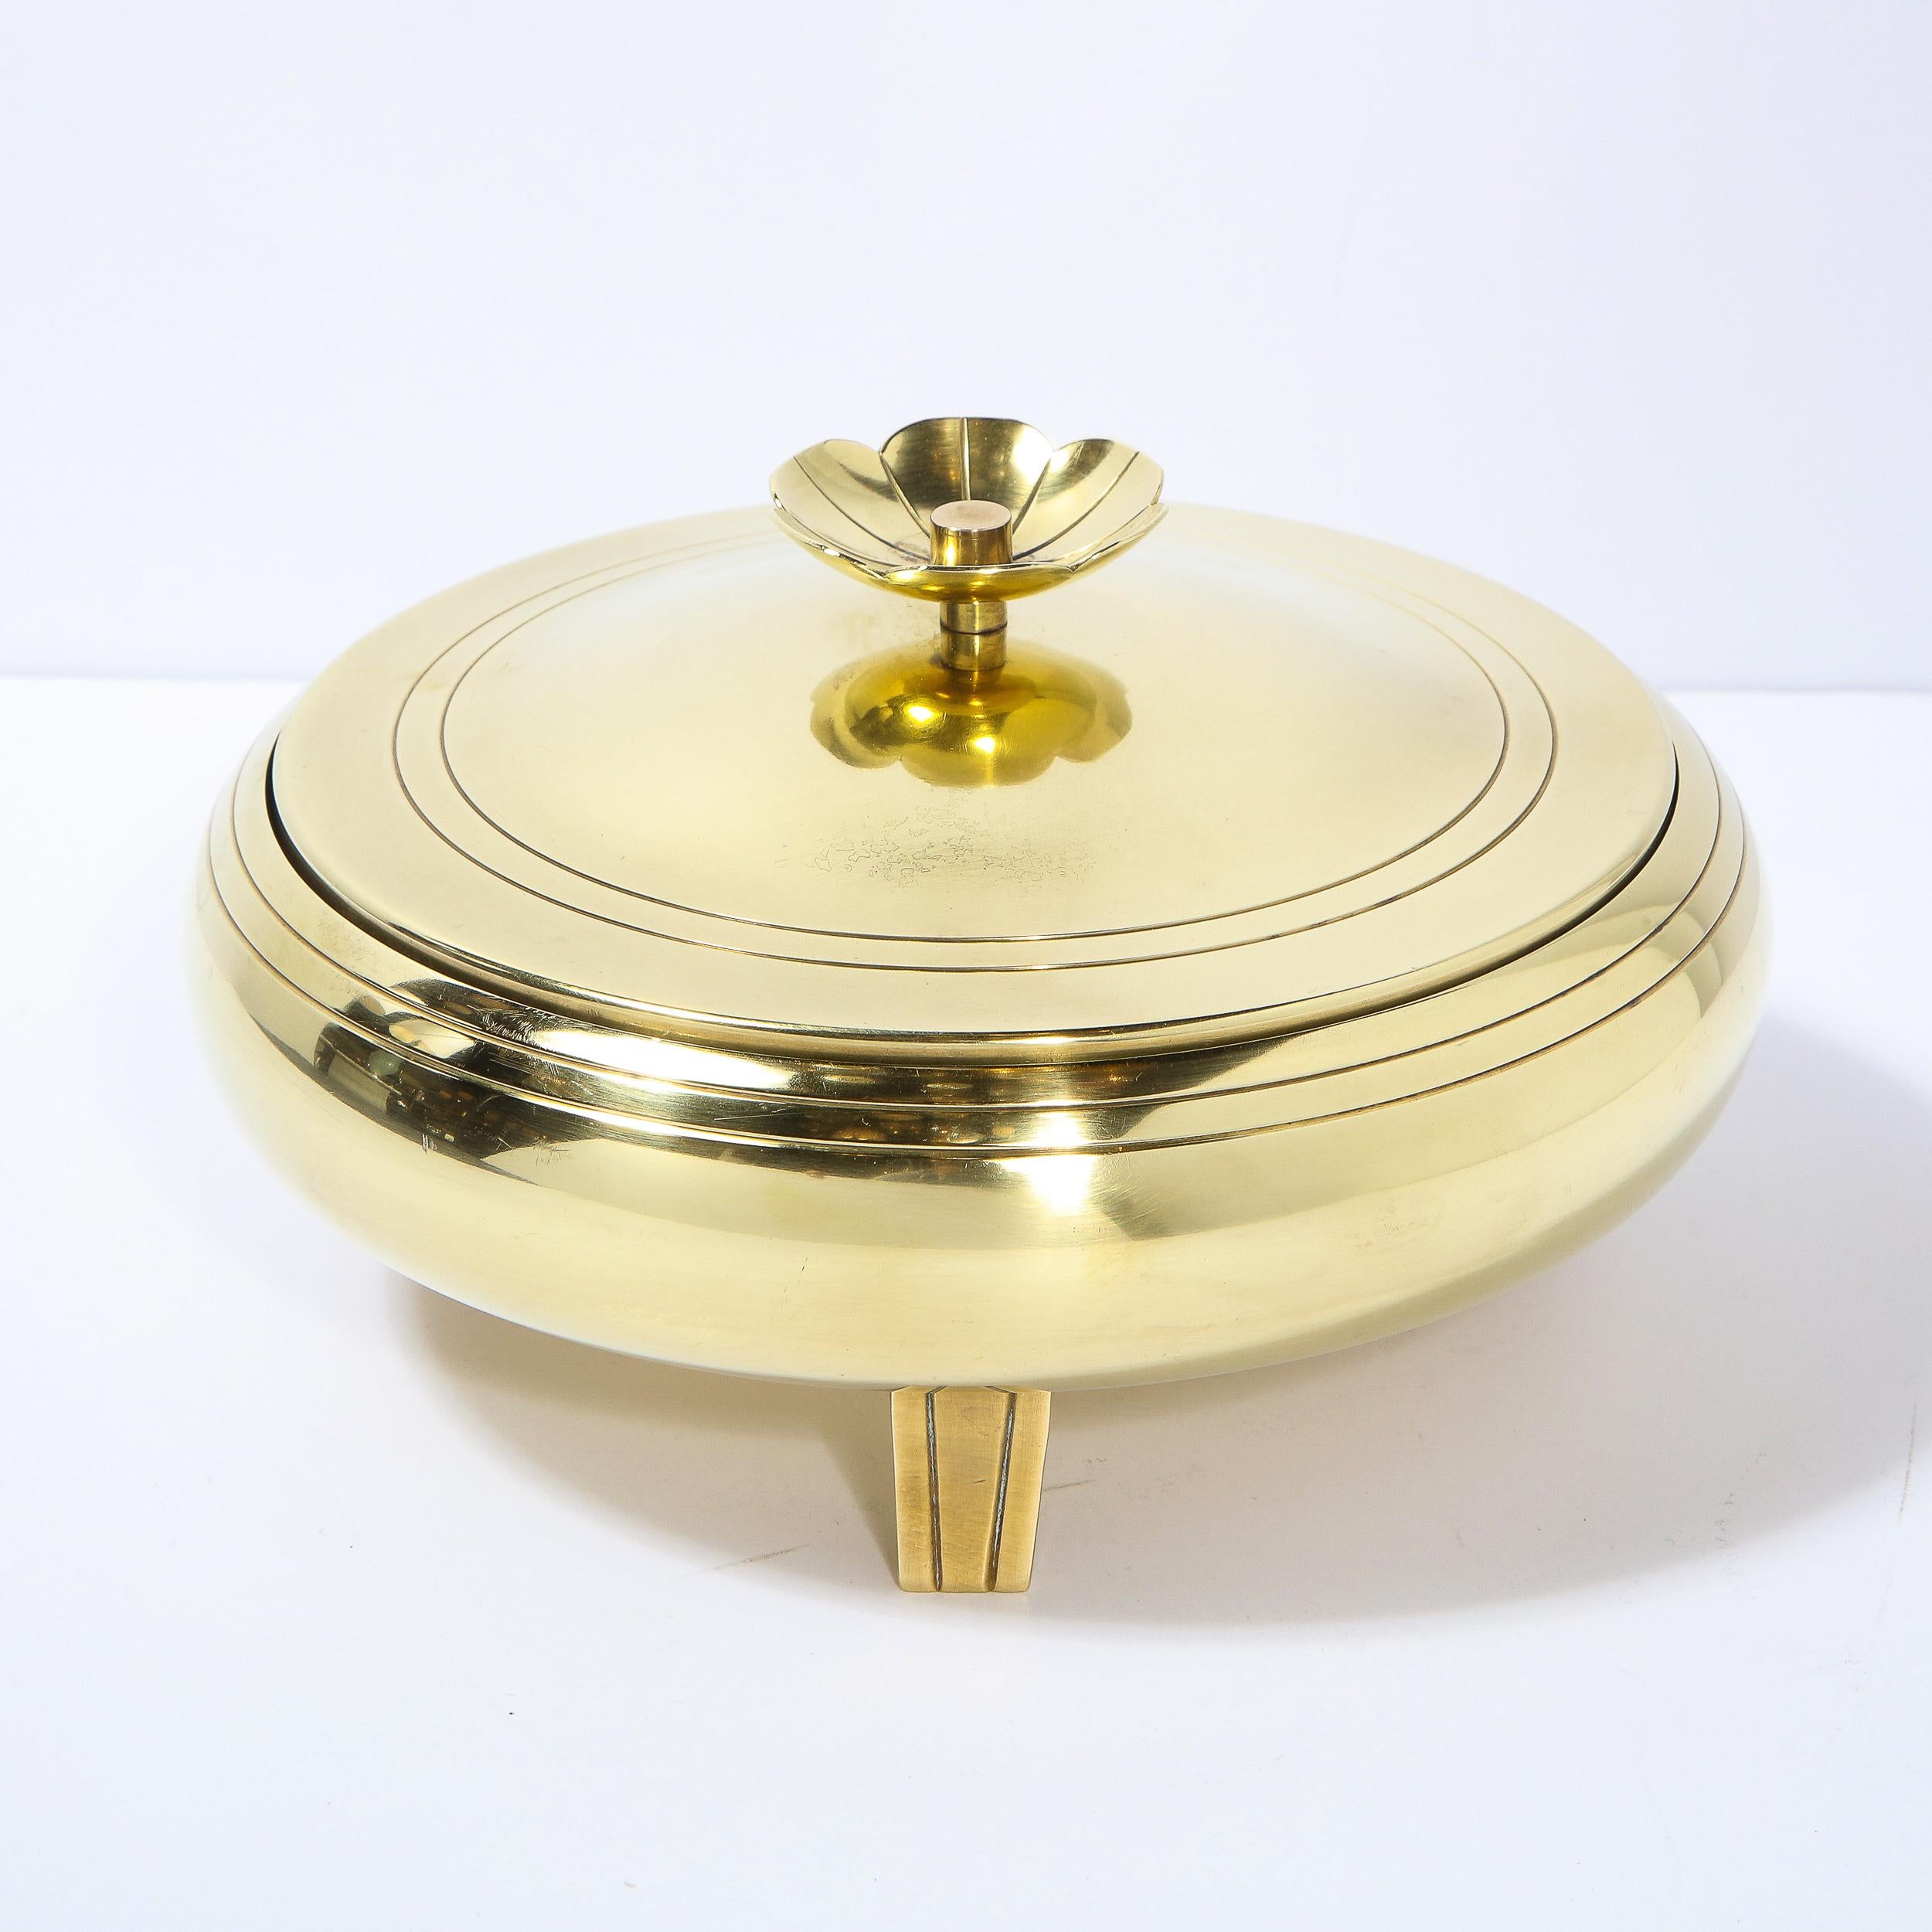 American Mid-Century Modern Footed Brass Bowl by Tommi Parzinger for Dorlyn Silversmiths